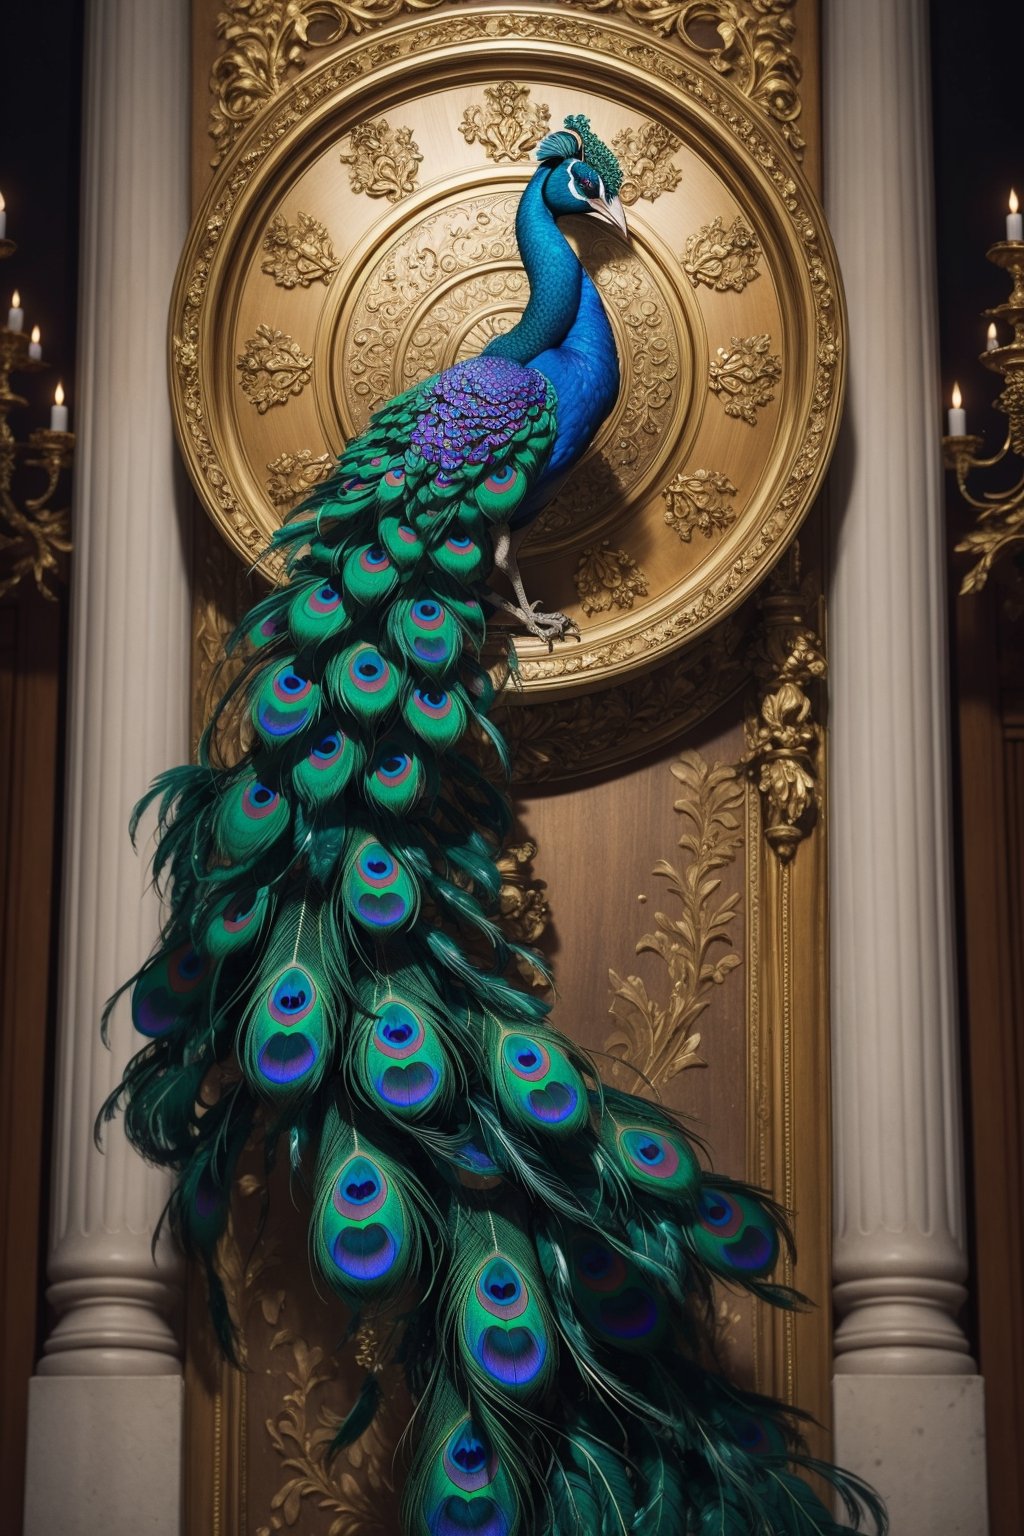 An ornate, baroque-inspired peacock with elaborate, swirling feathers.